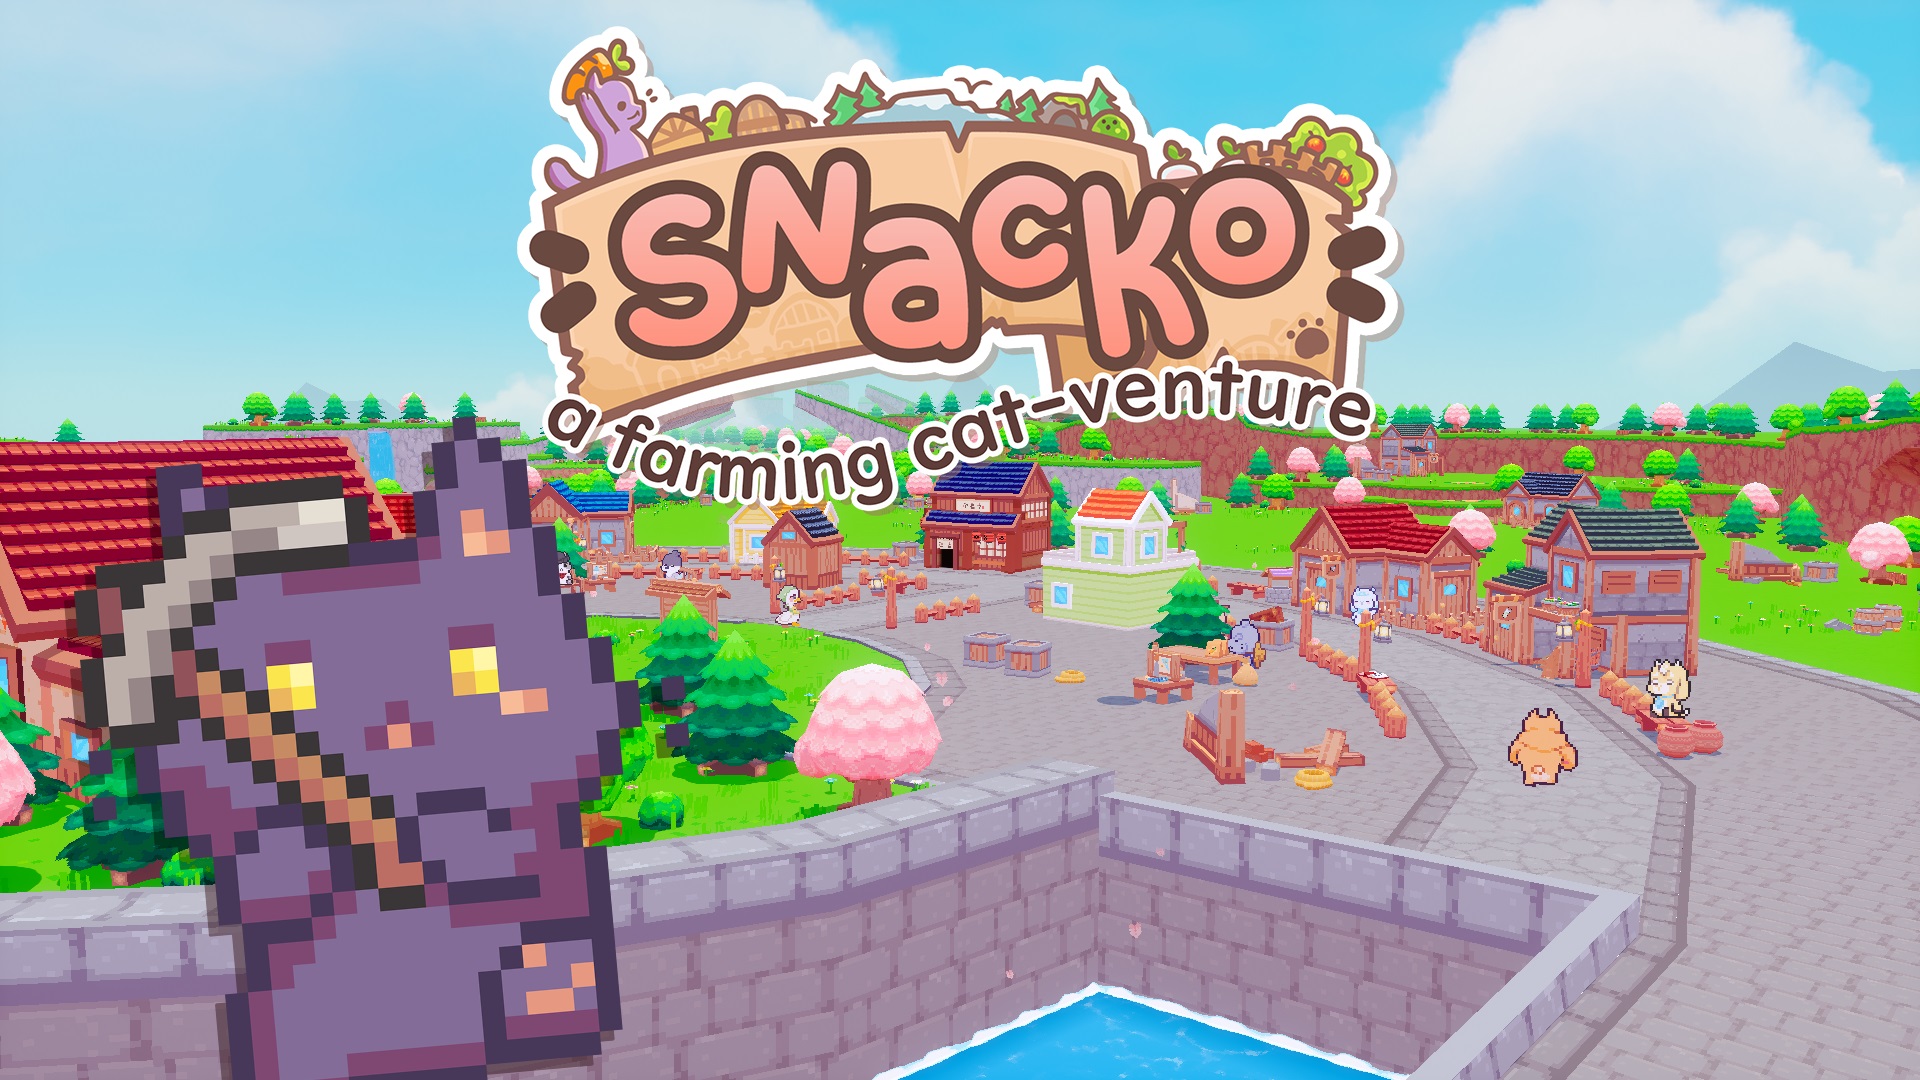 Cat Farmer Game Snacko Adds a Switch Version, Launch Set for 2022